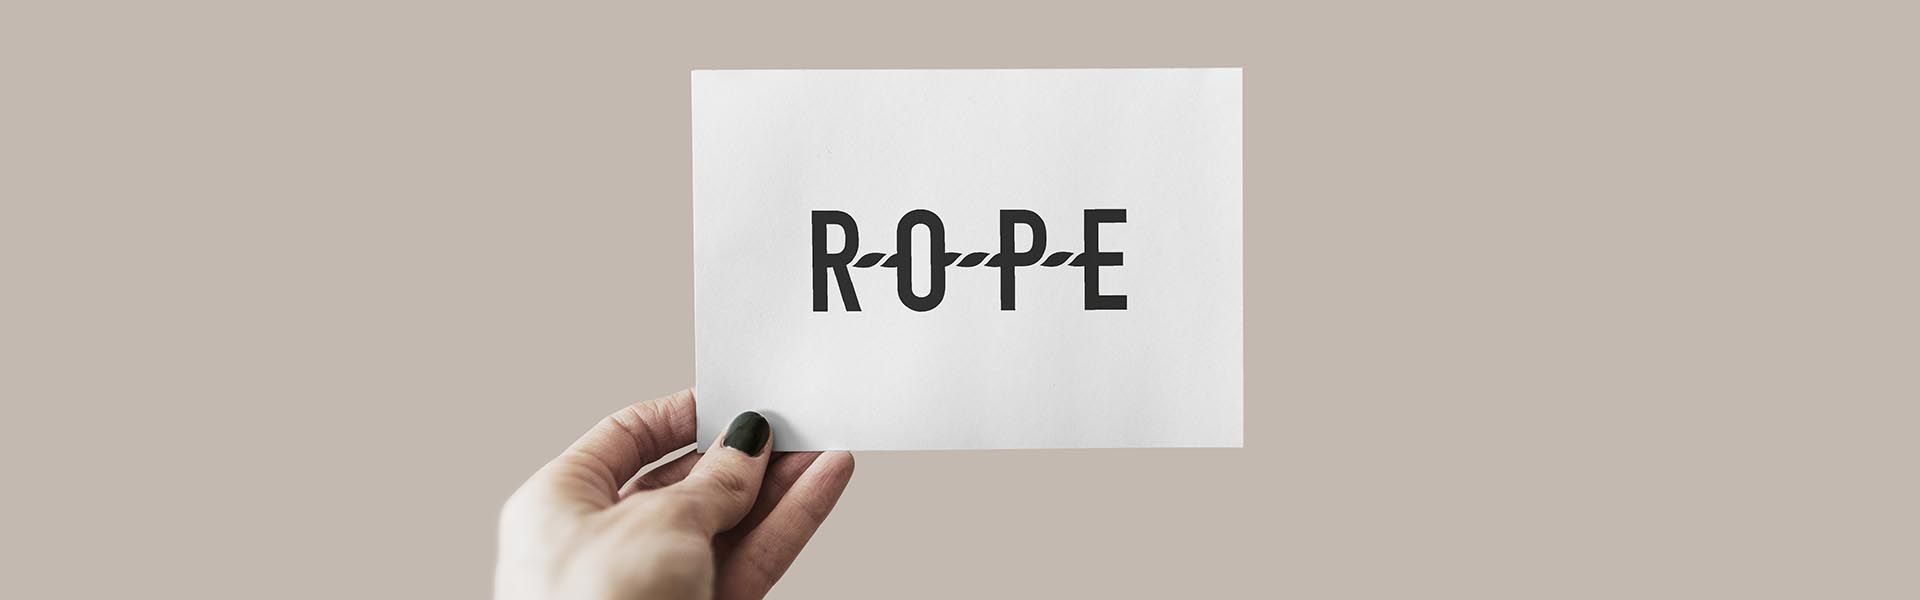 a person holding a piece of paper with the rope system logo on it